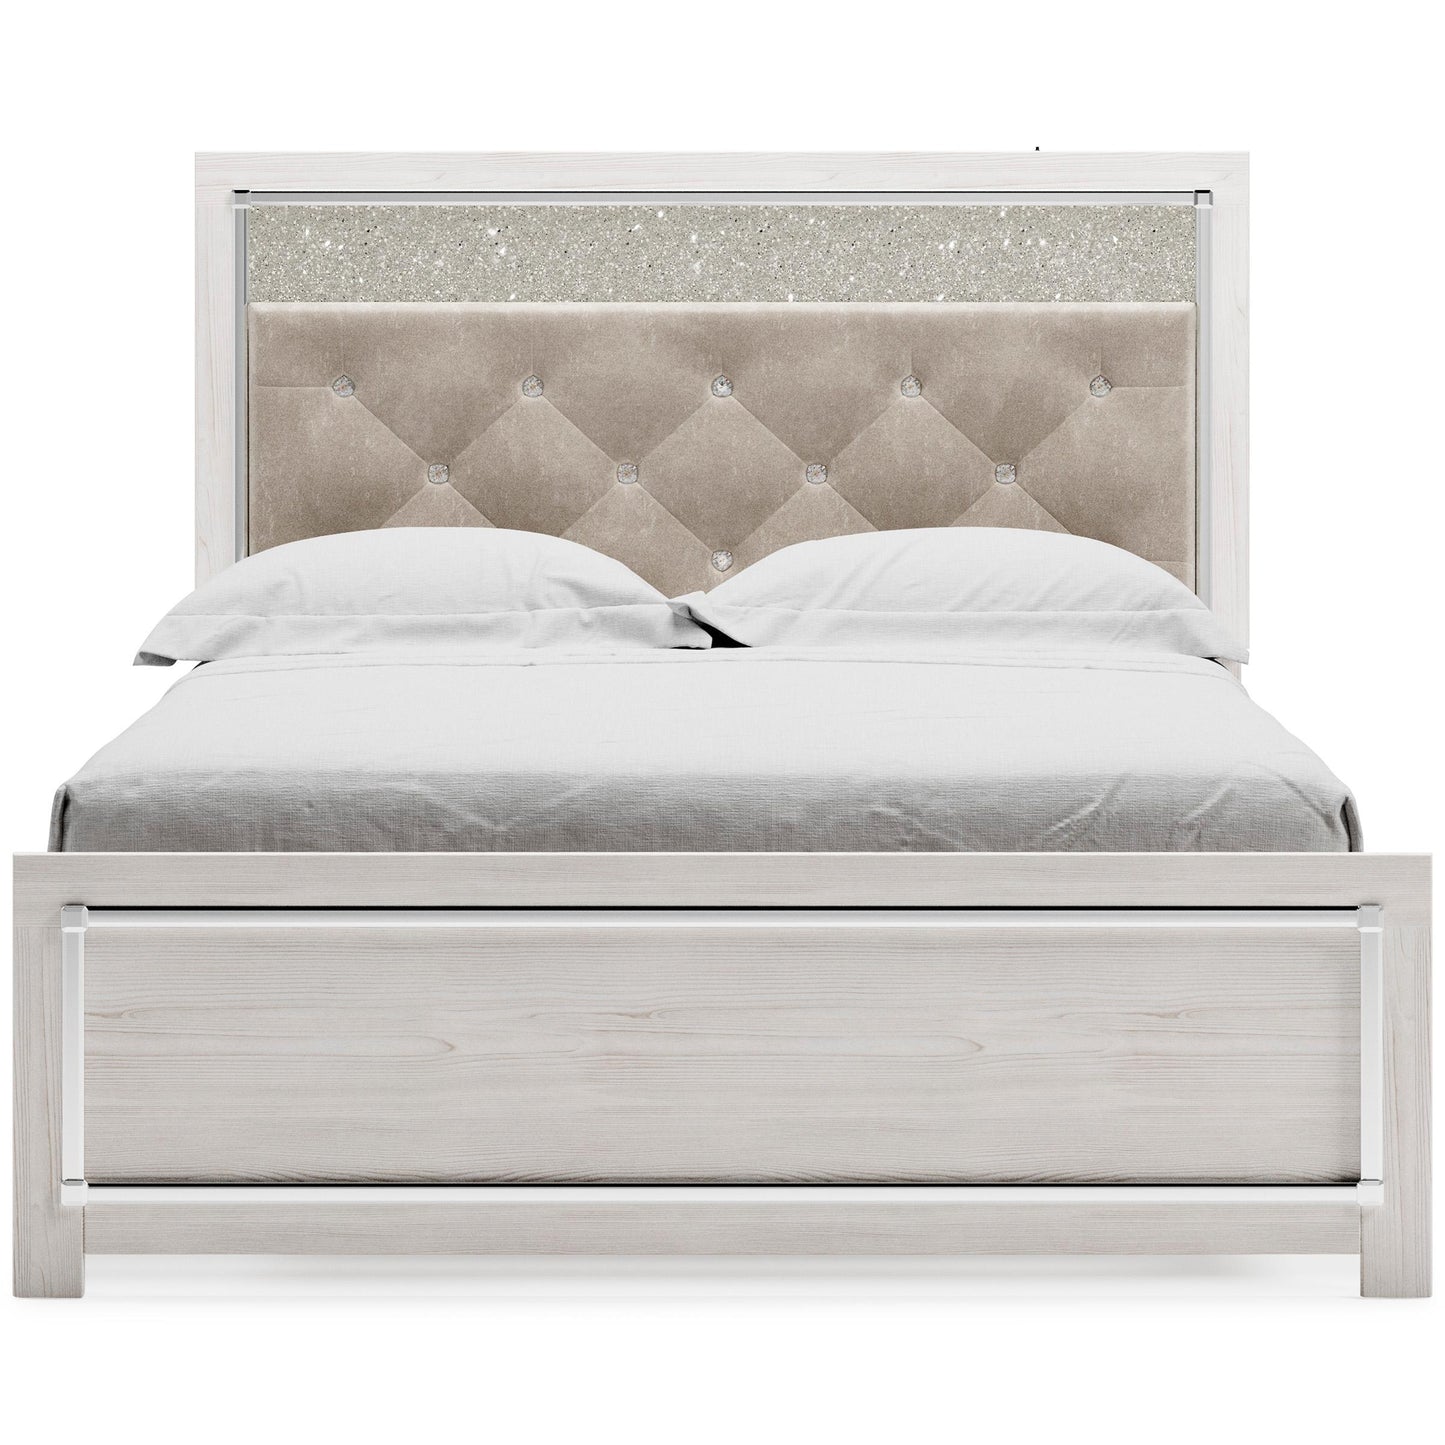 Signature Design by Ashley Altyra Queen Upholstered Panel Bed B2640-57/B2640-54/B2640-96